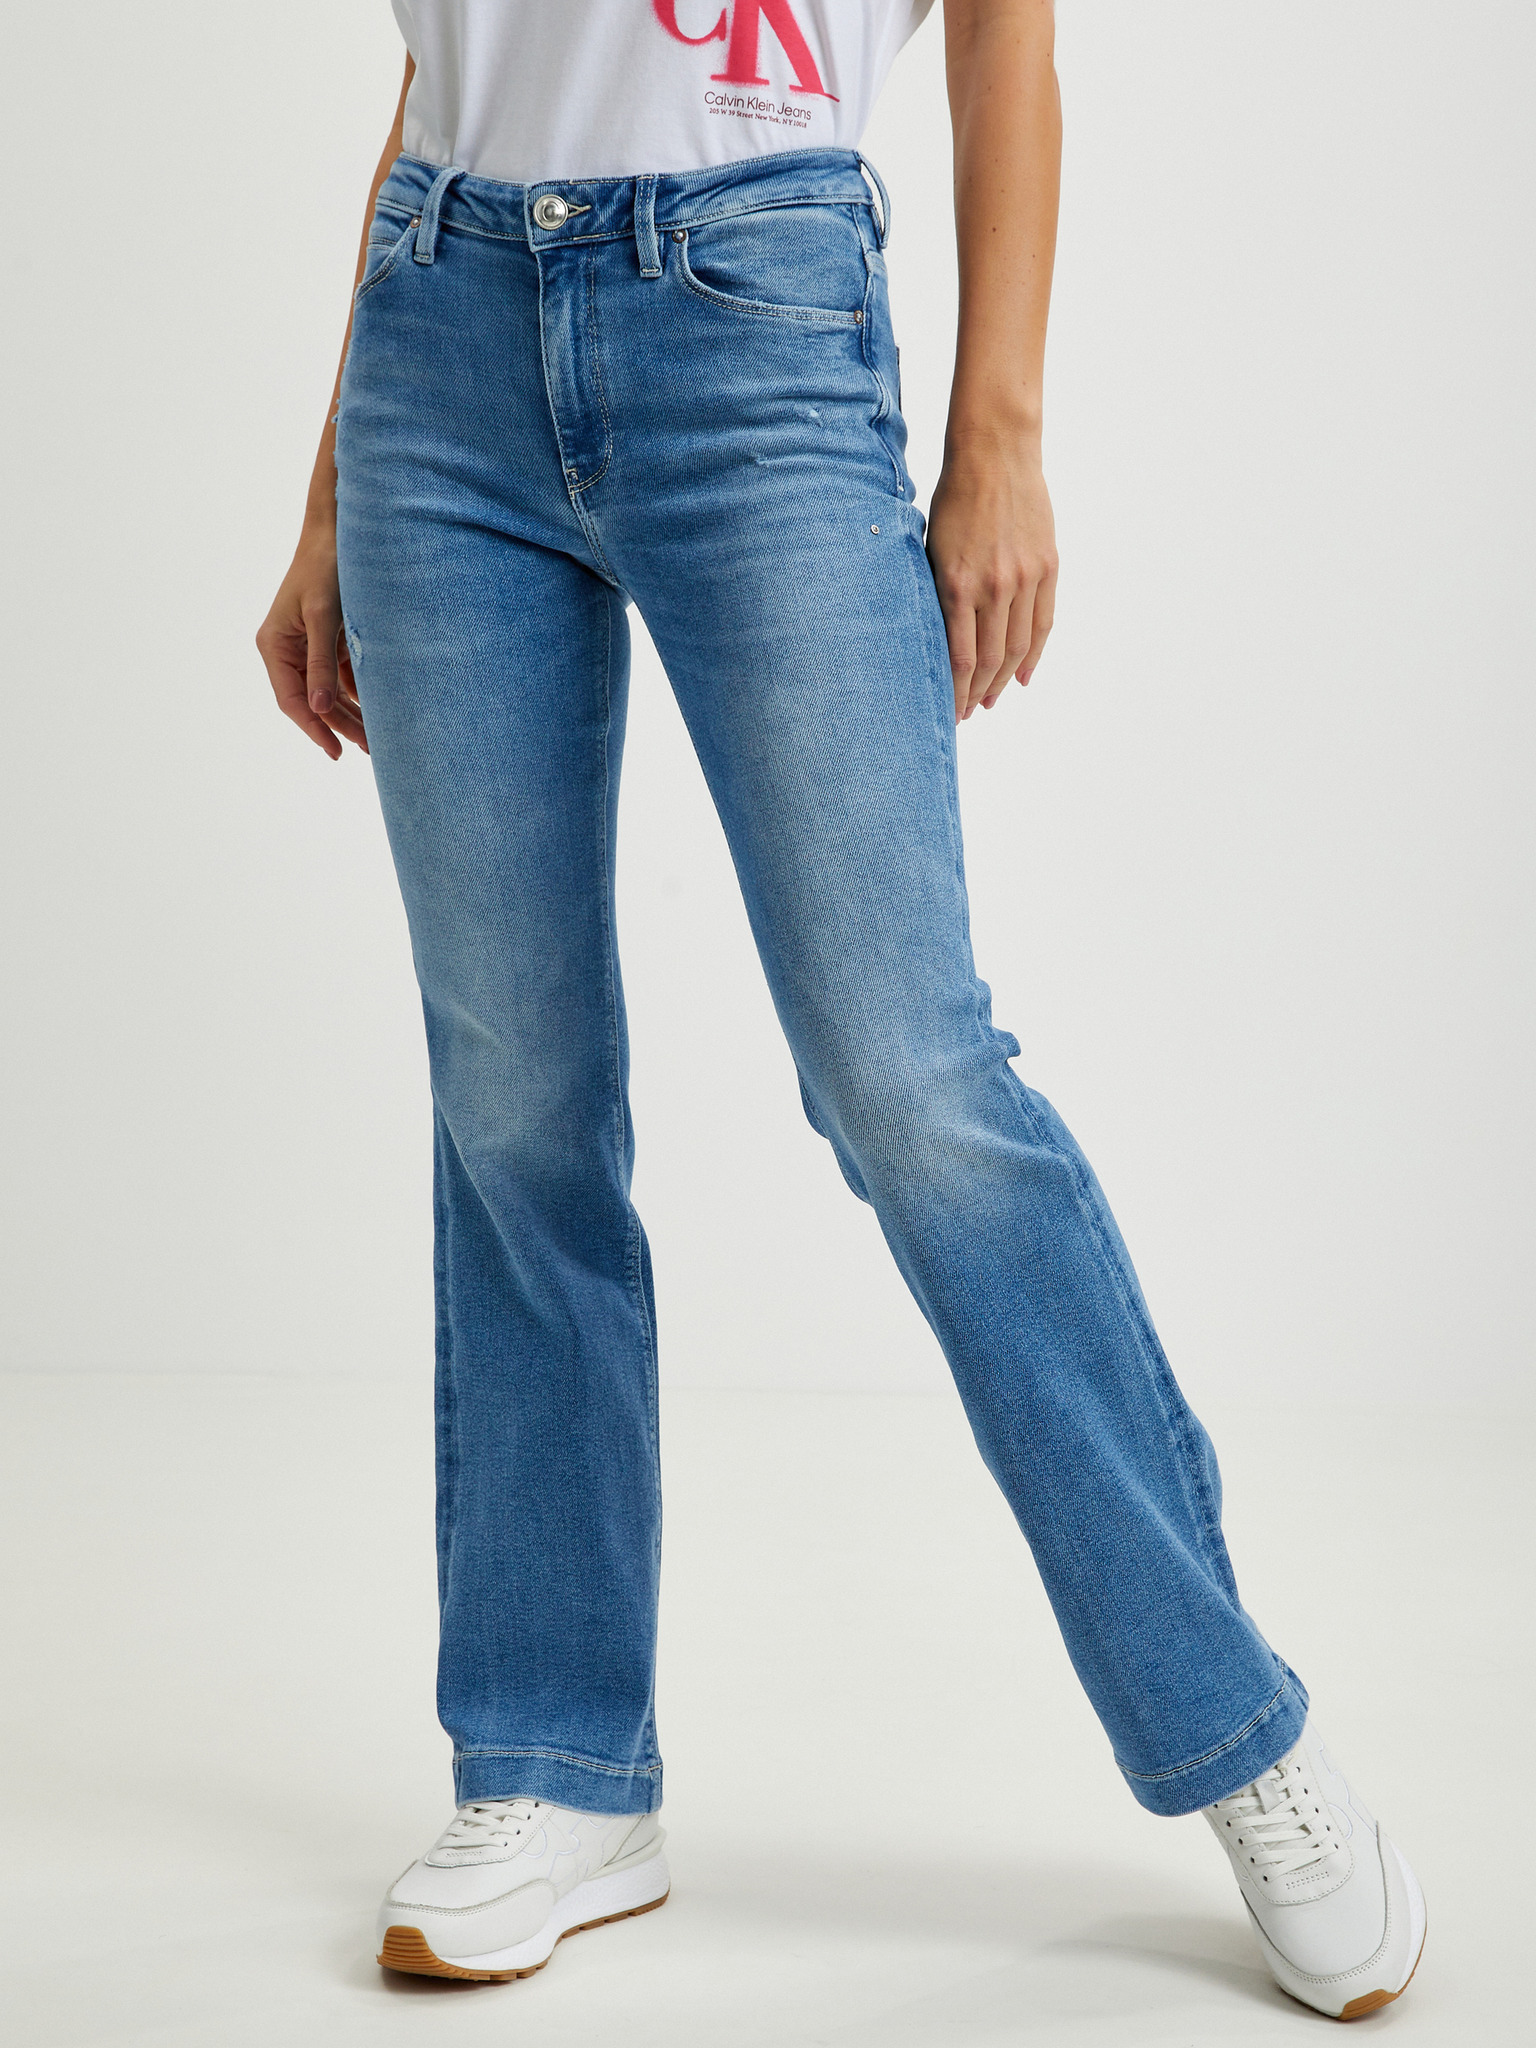 Guess - Sexy Boot Jeans